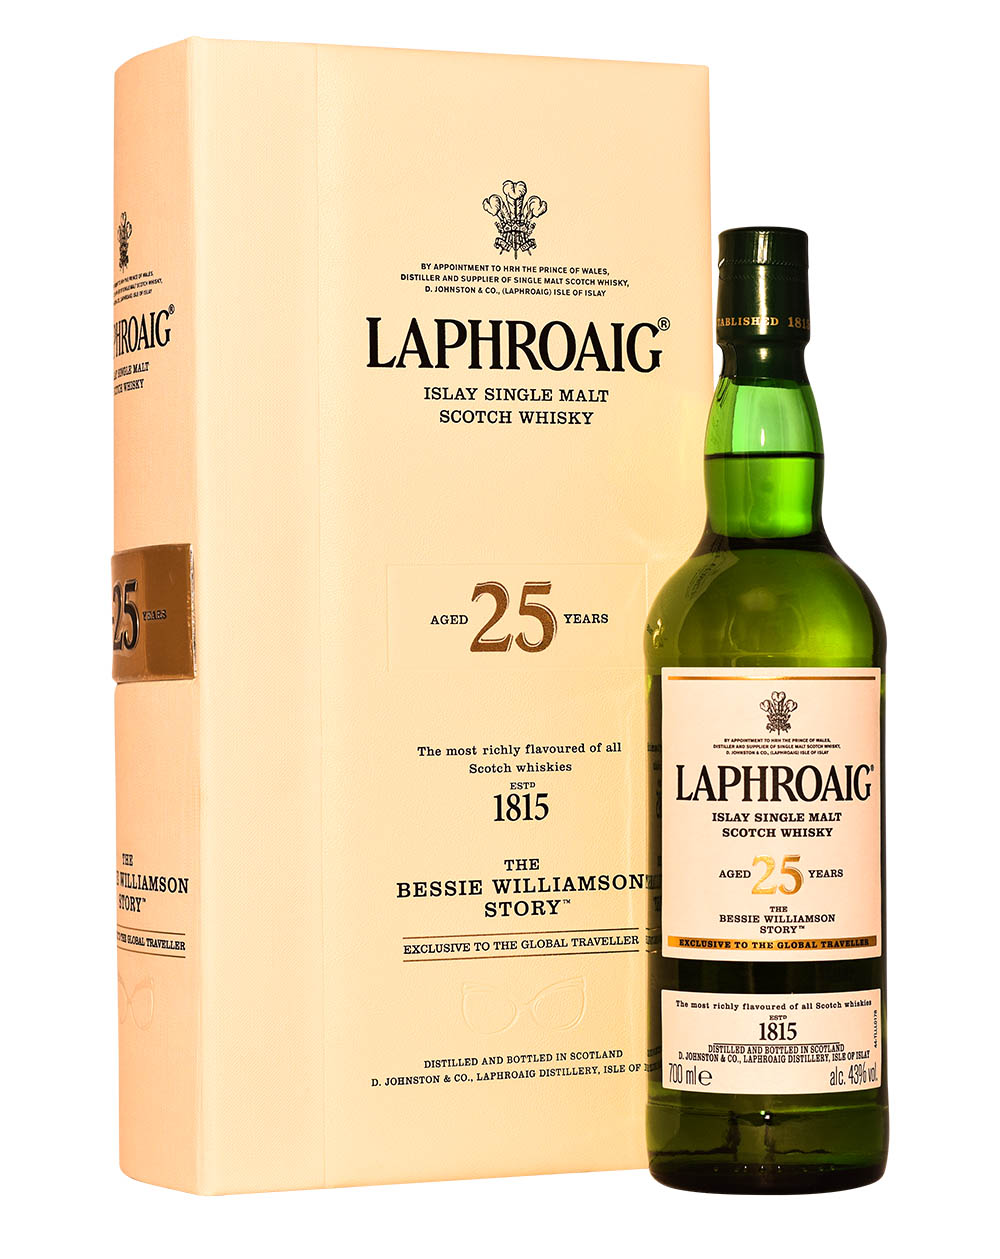 Laphroaig The Bessie Williamson Story (25 Years Old) Book Musthave Malts MHM